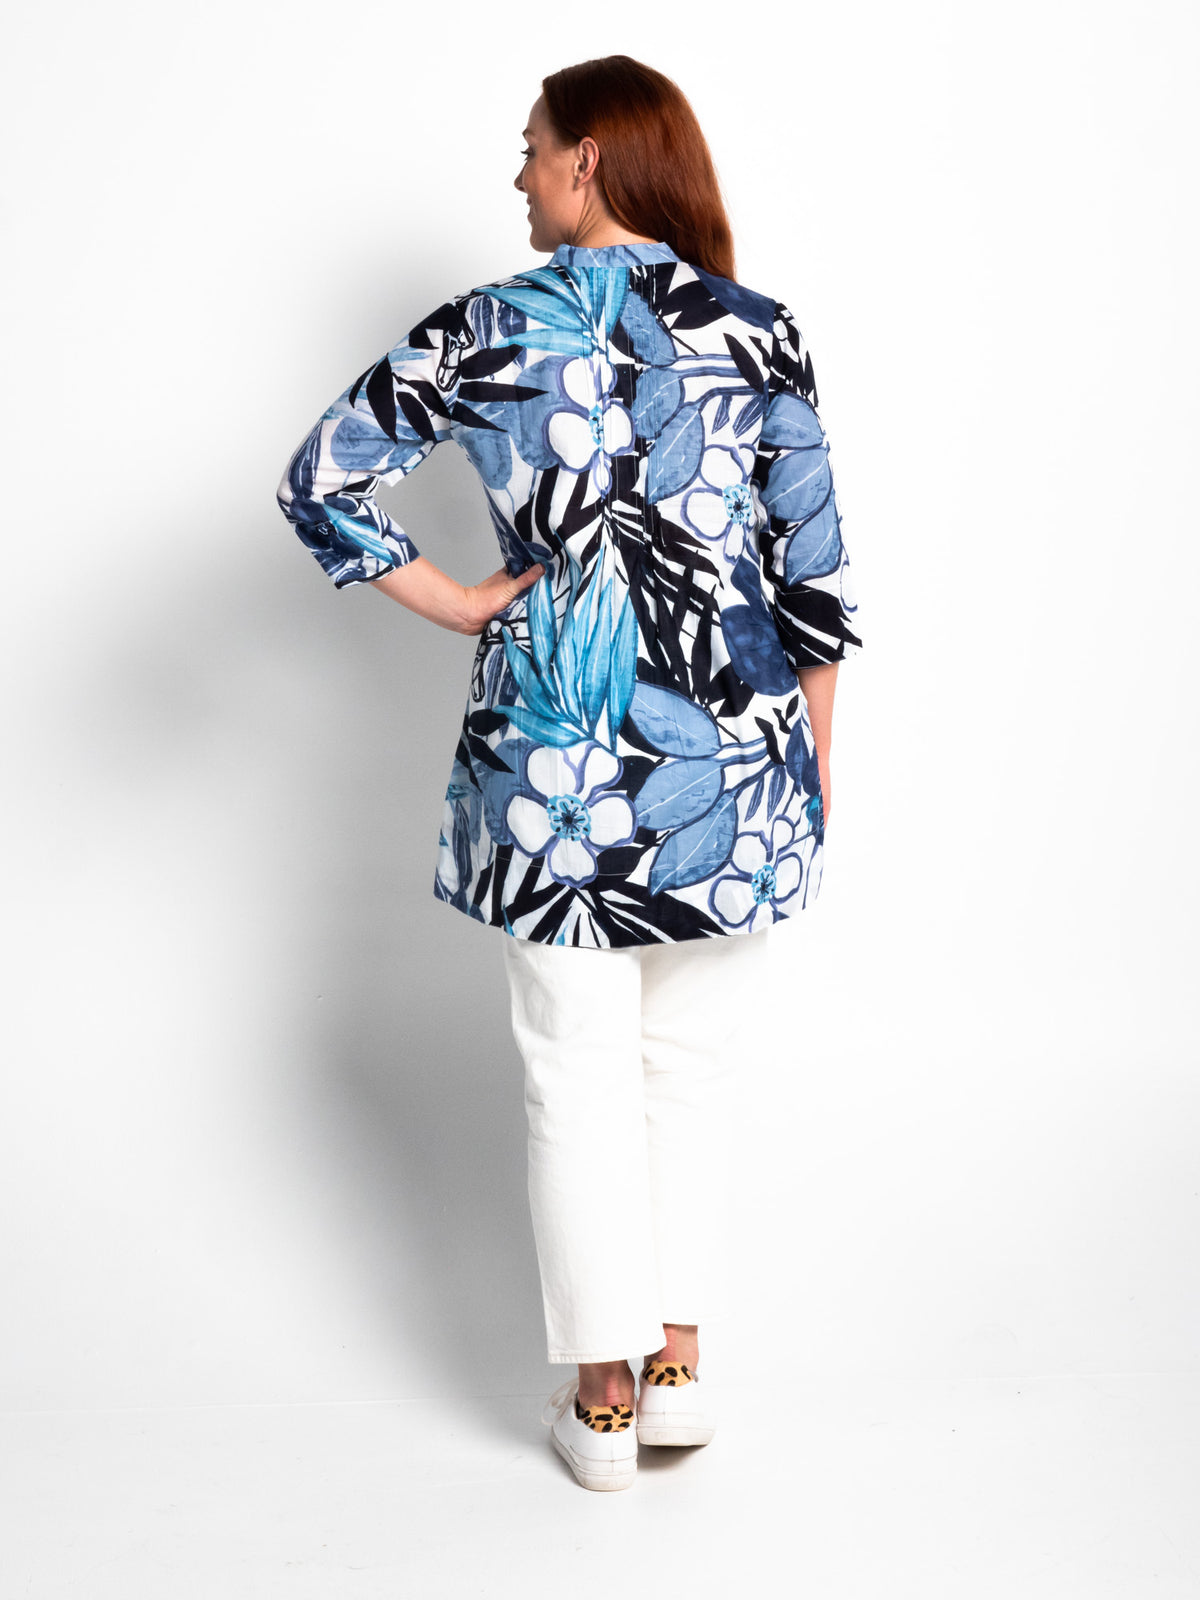 Tully Top in Blue Tropical